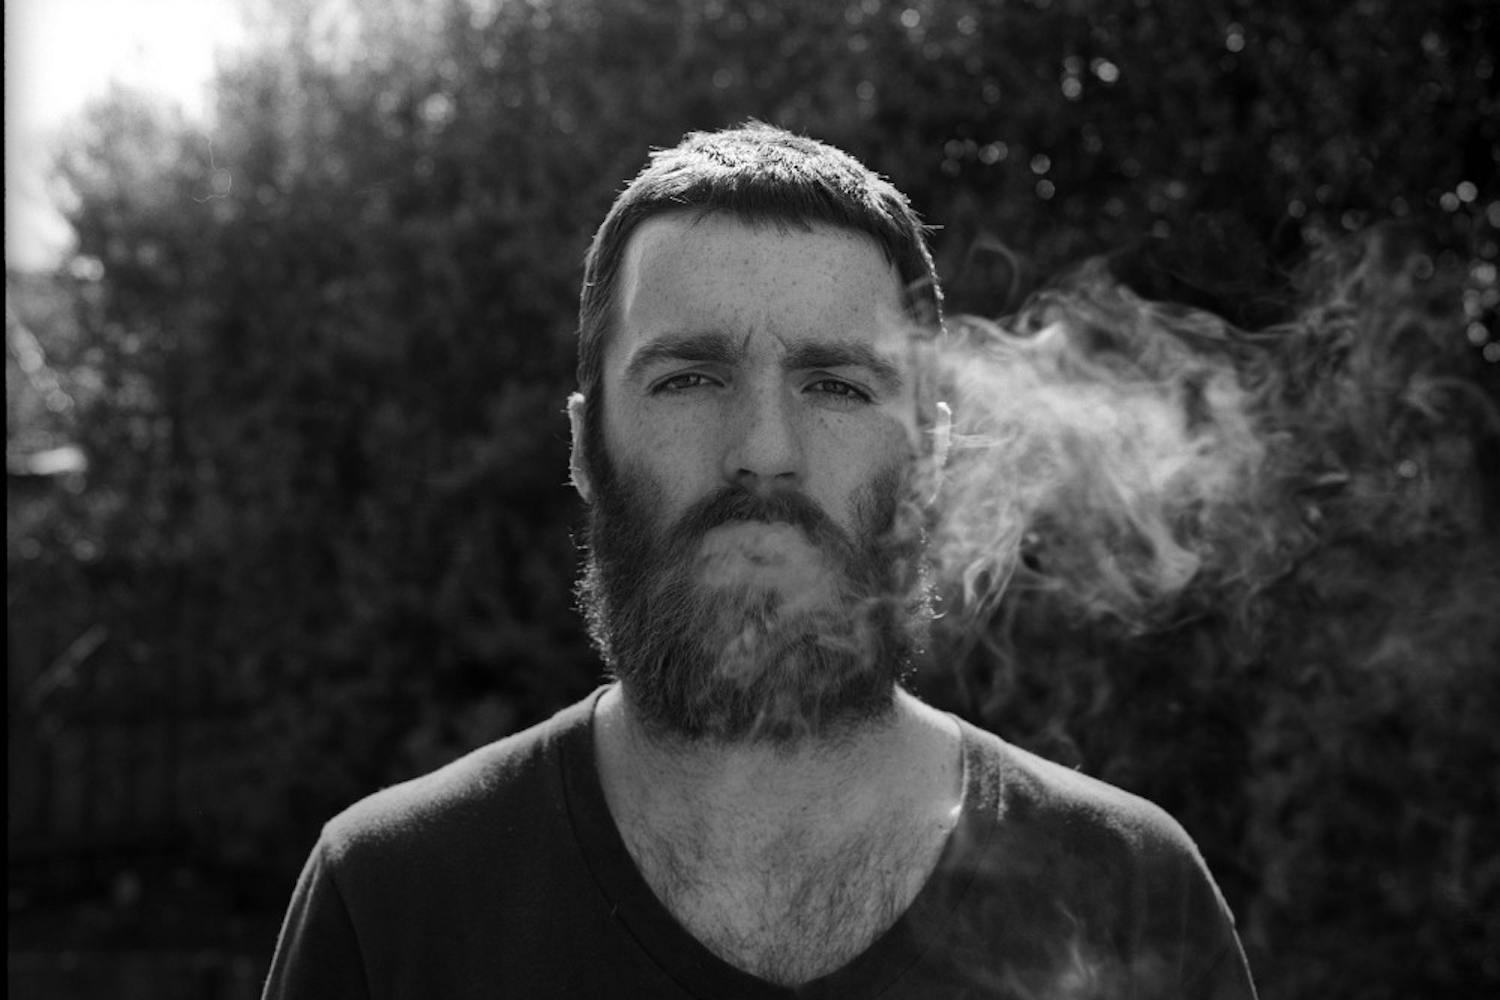 Chet Faker by: Interview Magazine